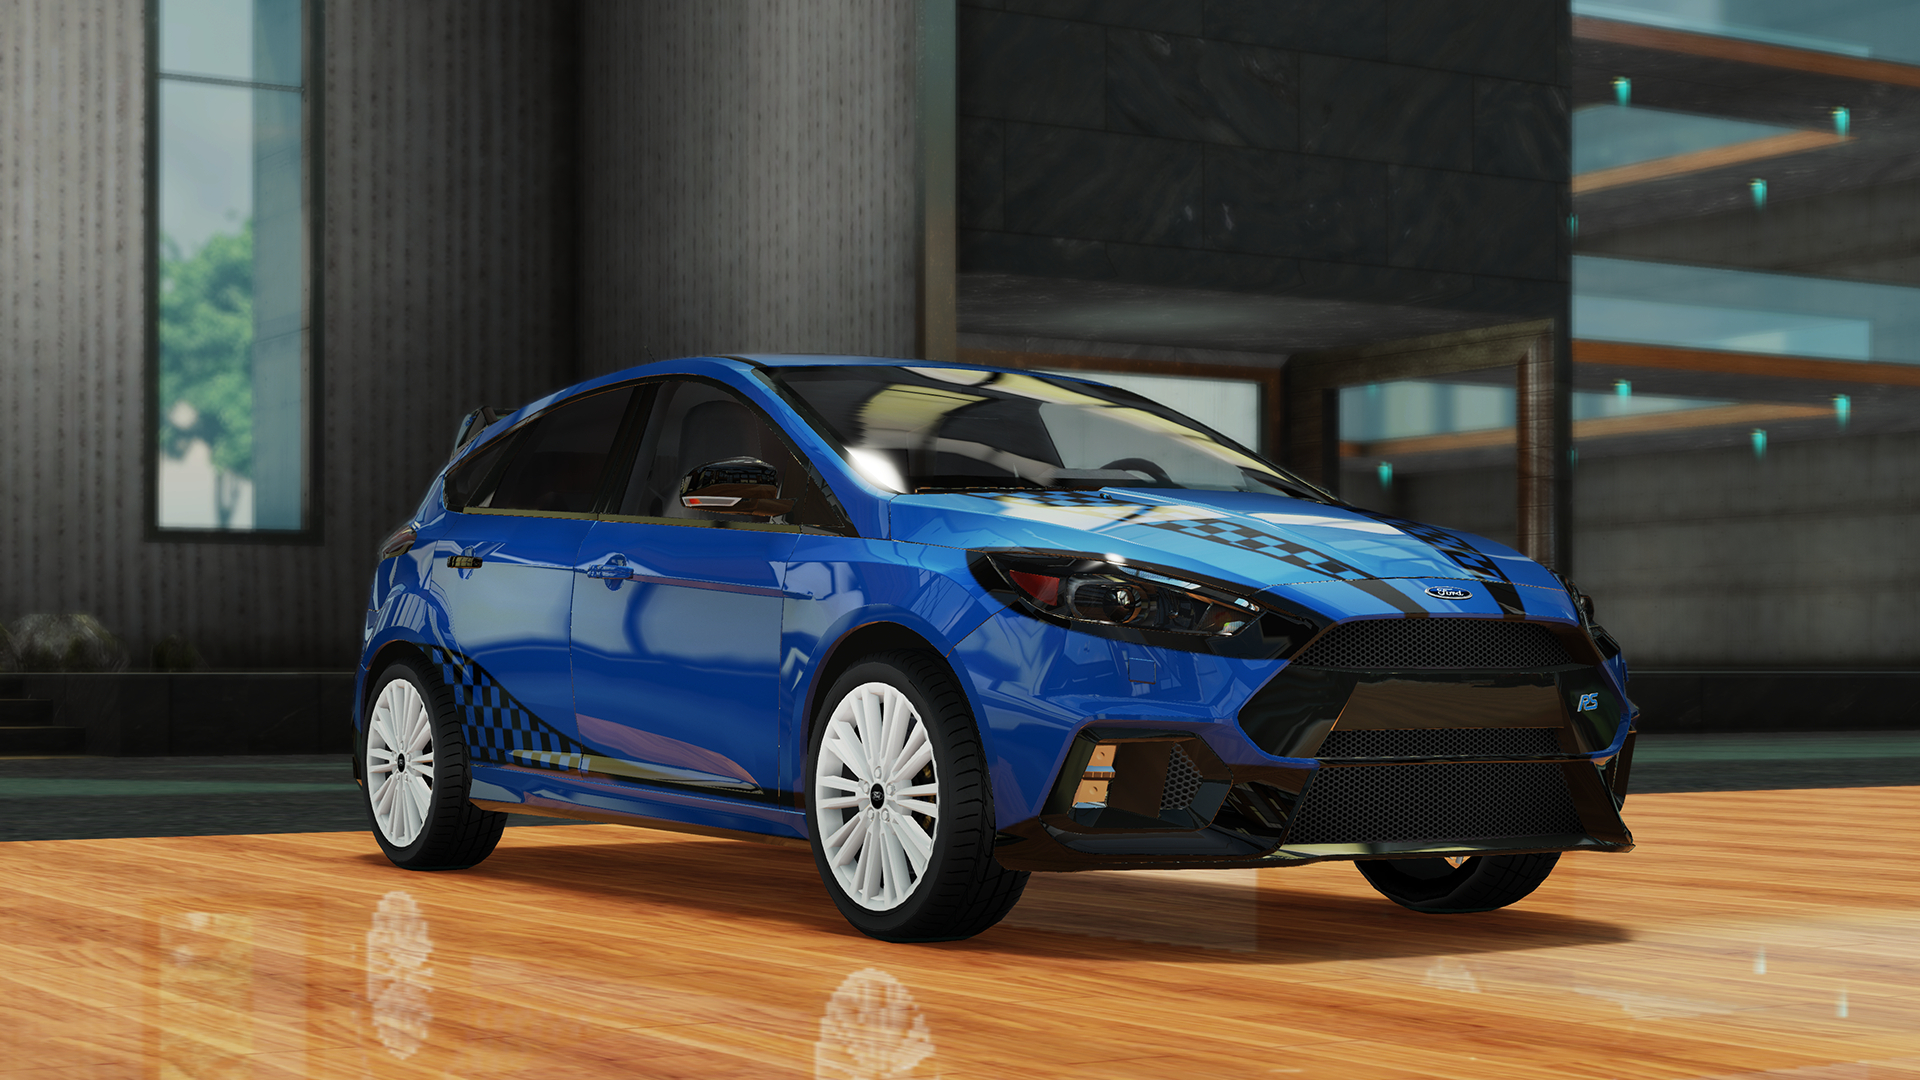 Ford Focus RS Chess - Gear.Club Unlimited 2